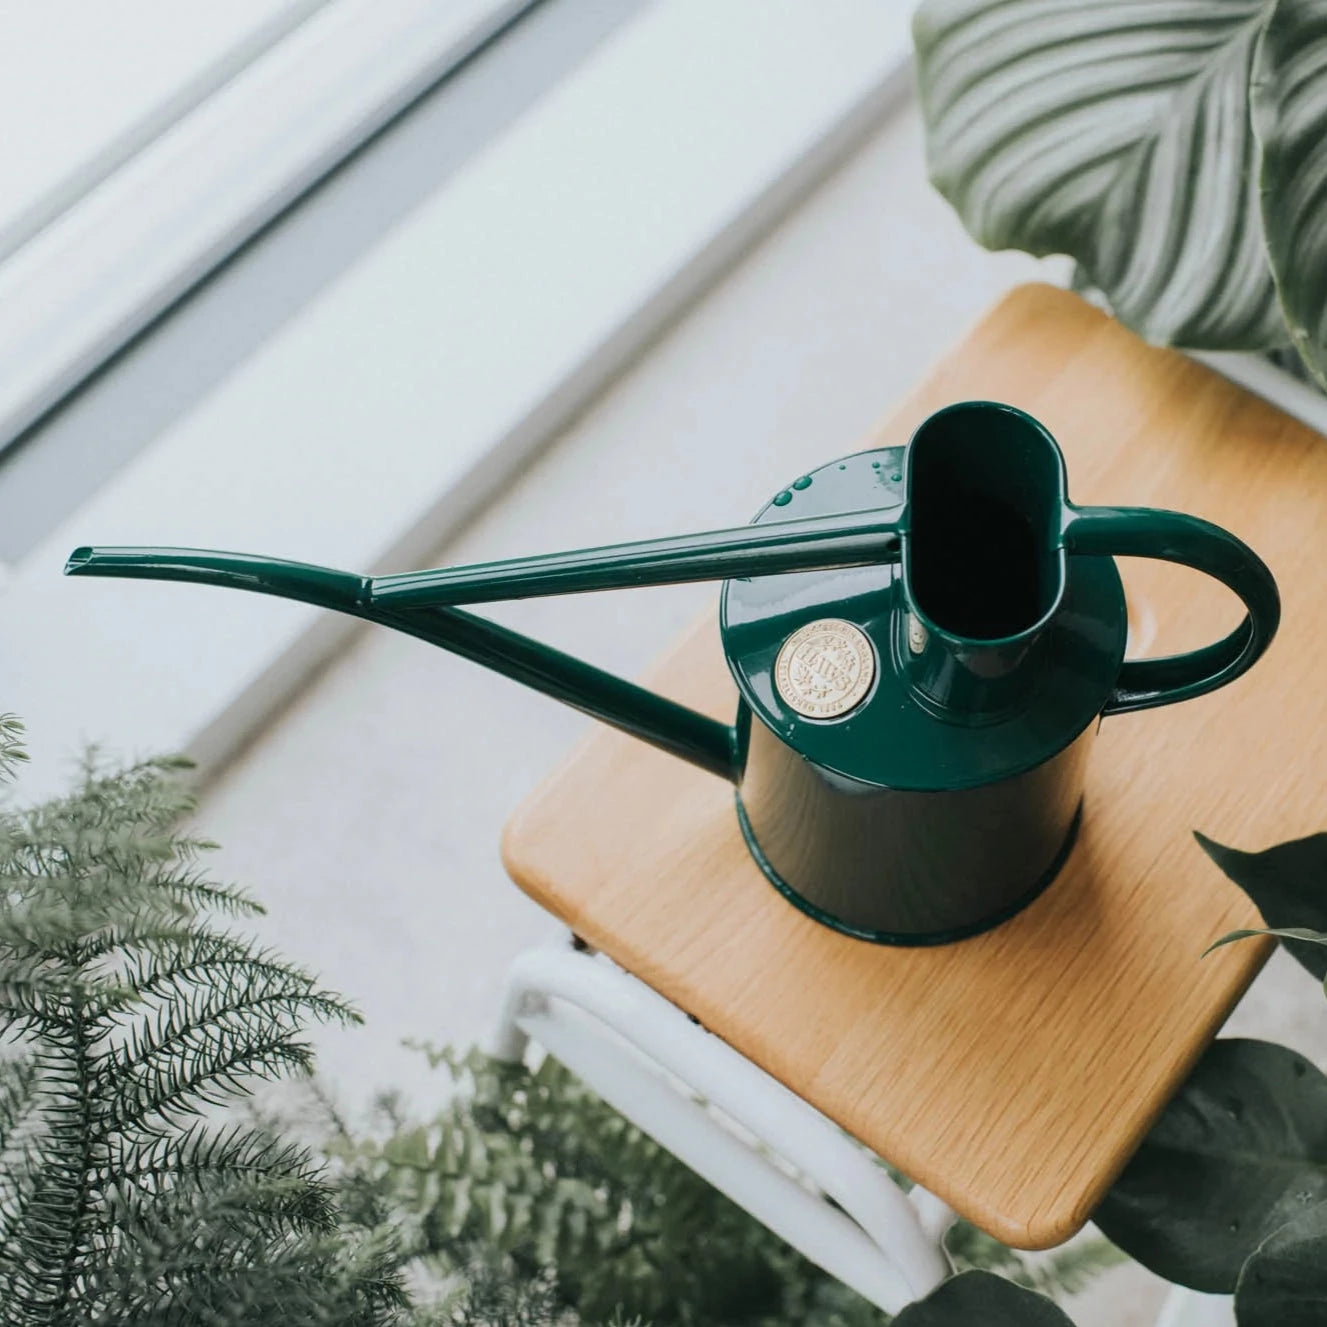 Meet the perfect small watering can for keeping your interior jungle in tip-top condition.